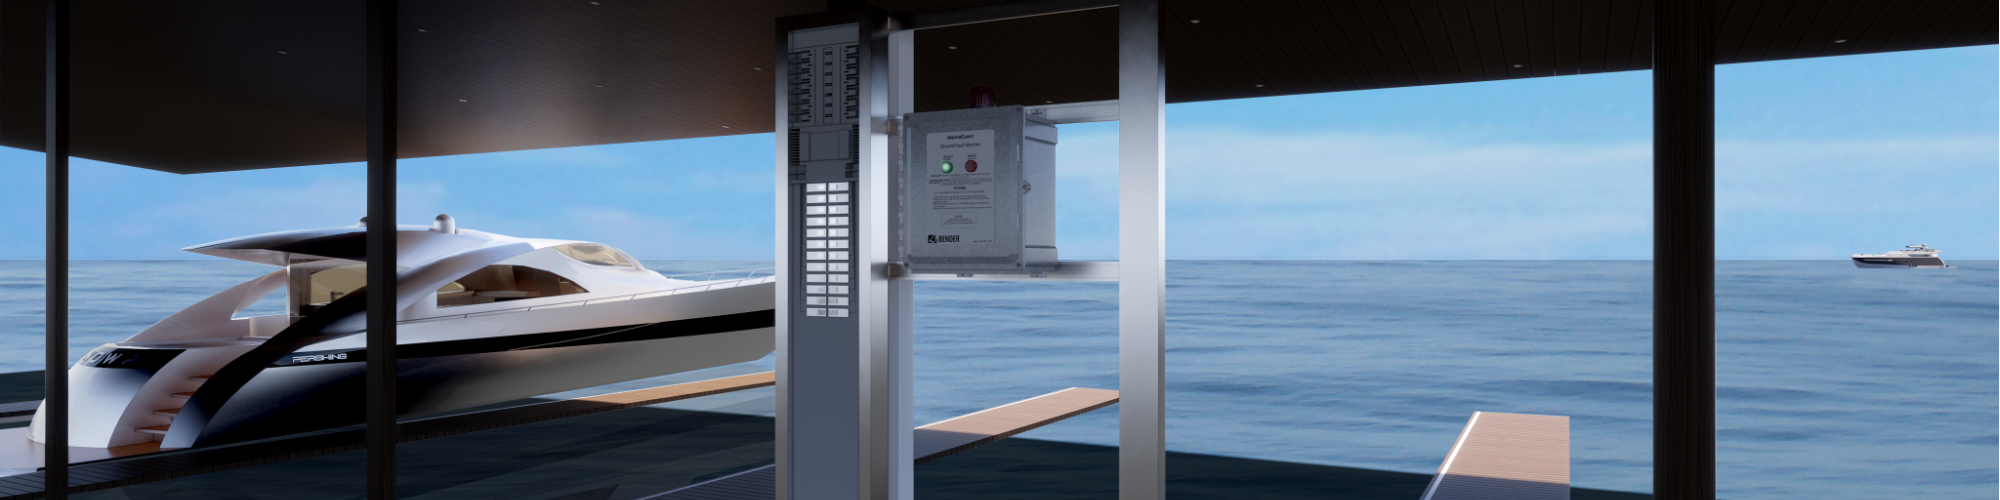 MarinaGuard for electrical dock safety